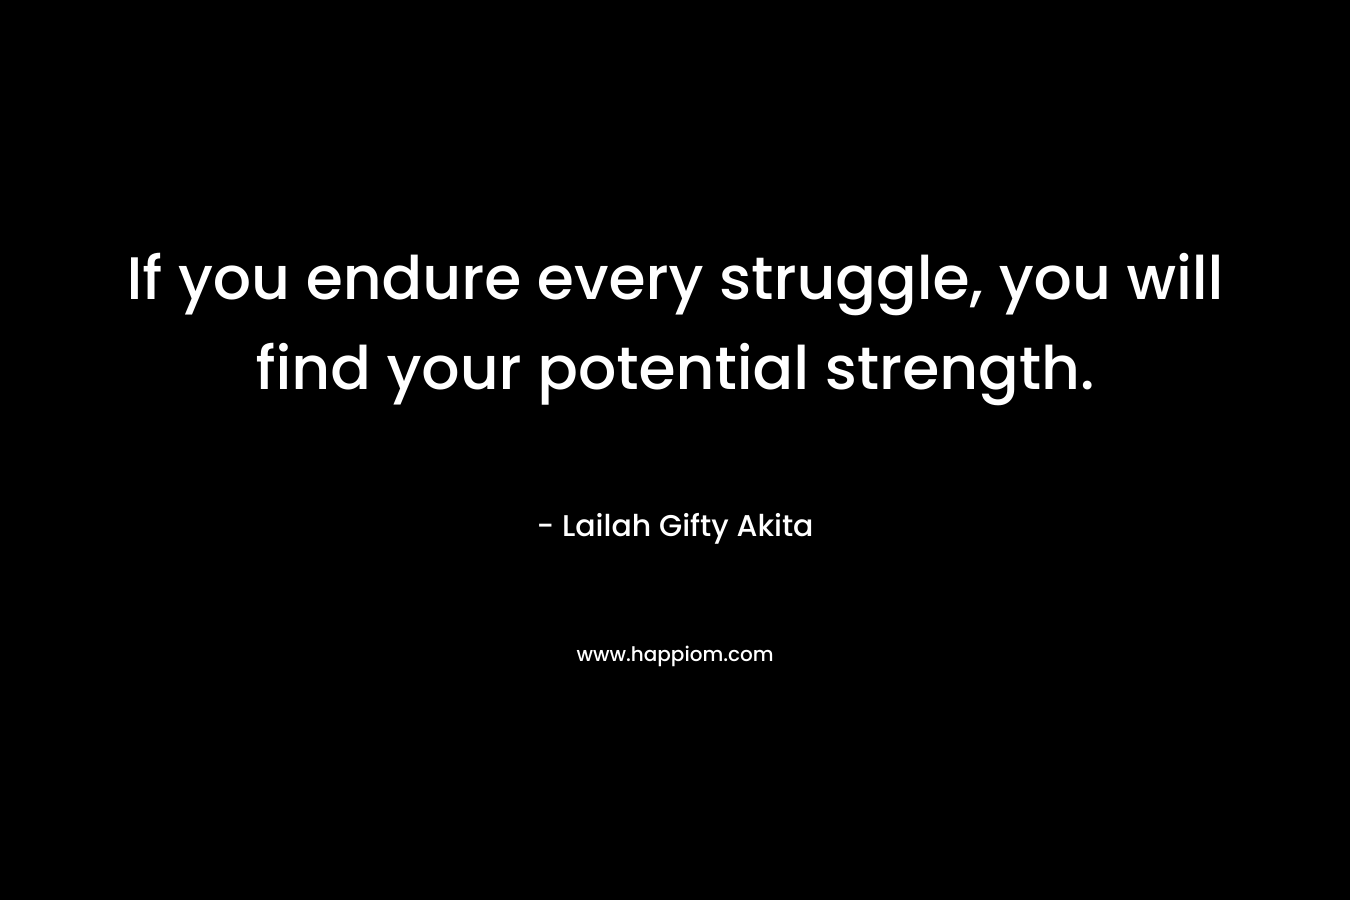 If you endure every struggle, you will find your potential strength.